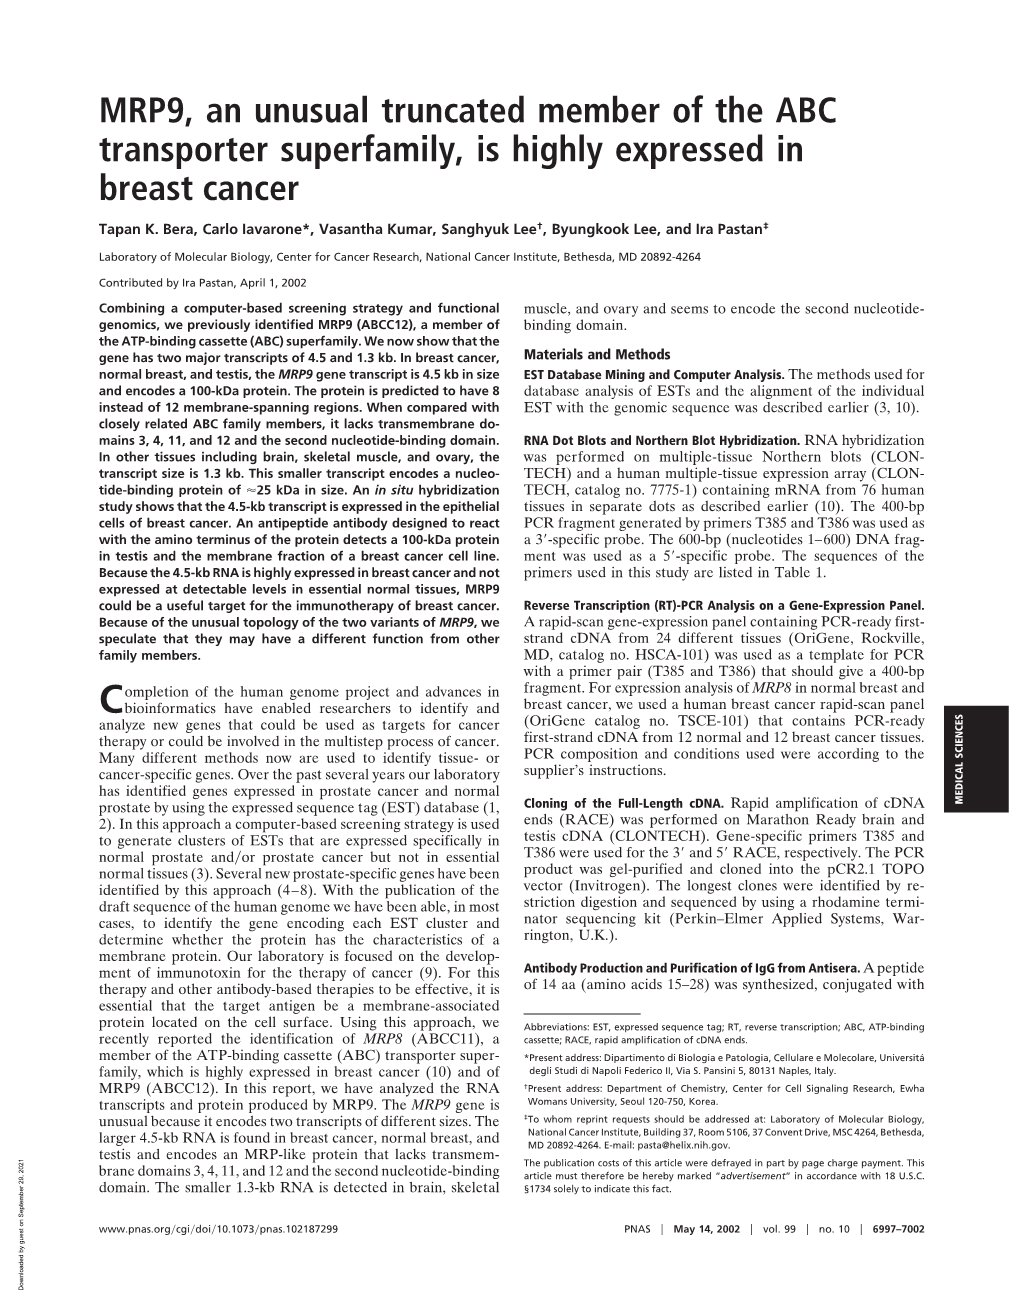 MRP9, an Unusual Truncated Member of the ABC Transporter Superfamily, Is Highly Expressed in Breast Cancer